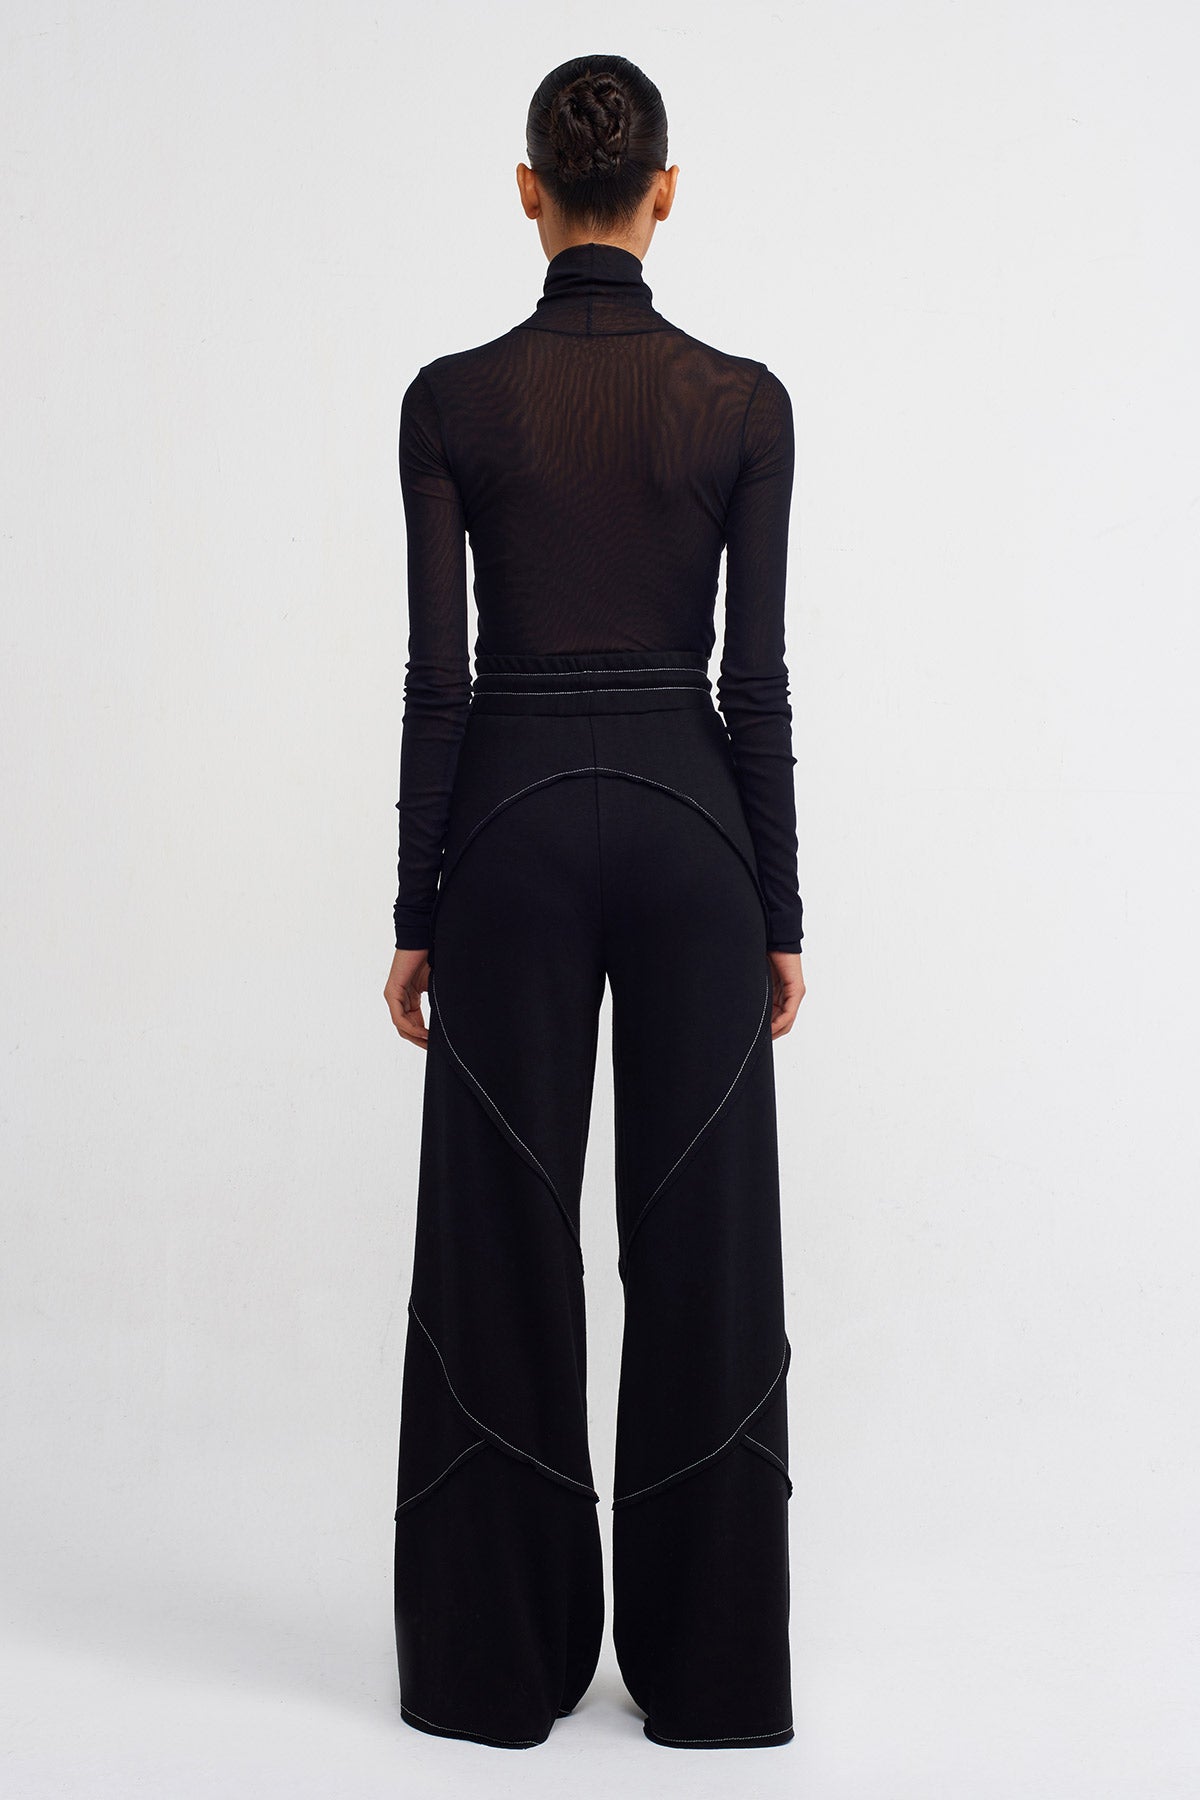 Black Wide Leg With Contrast Stitching Trousers-Y243013040